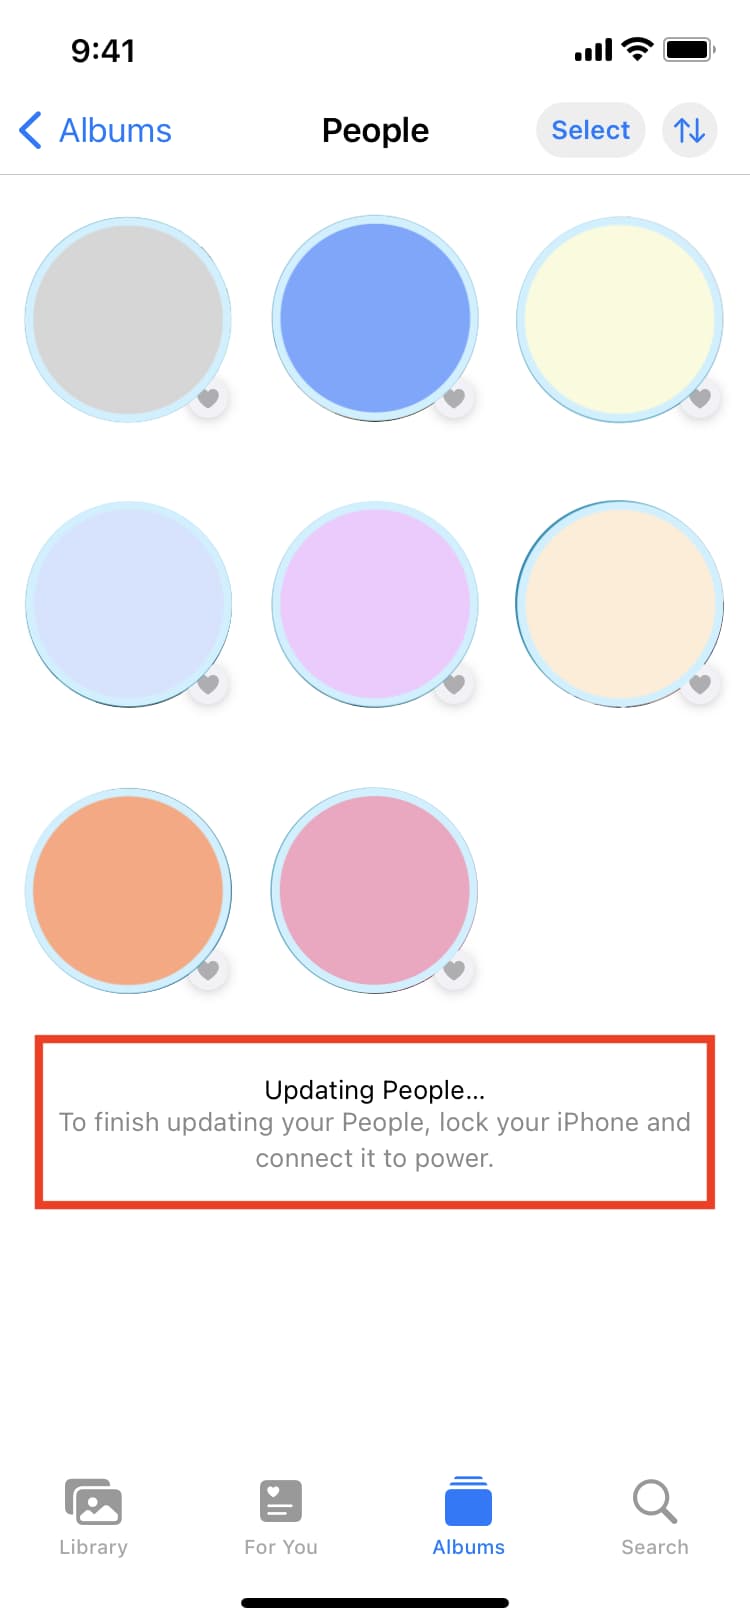 To finish updating your People, lock your iPhone and connect it to power